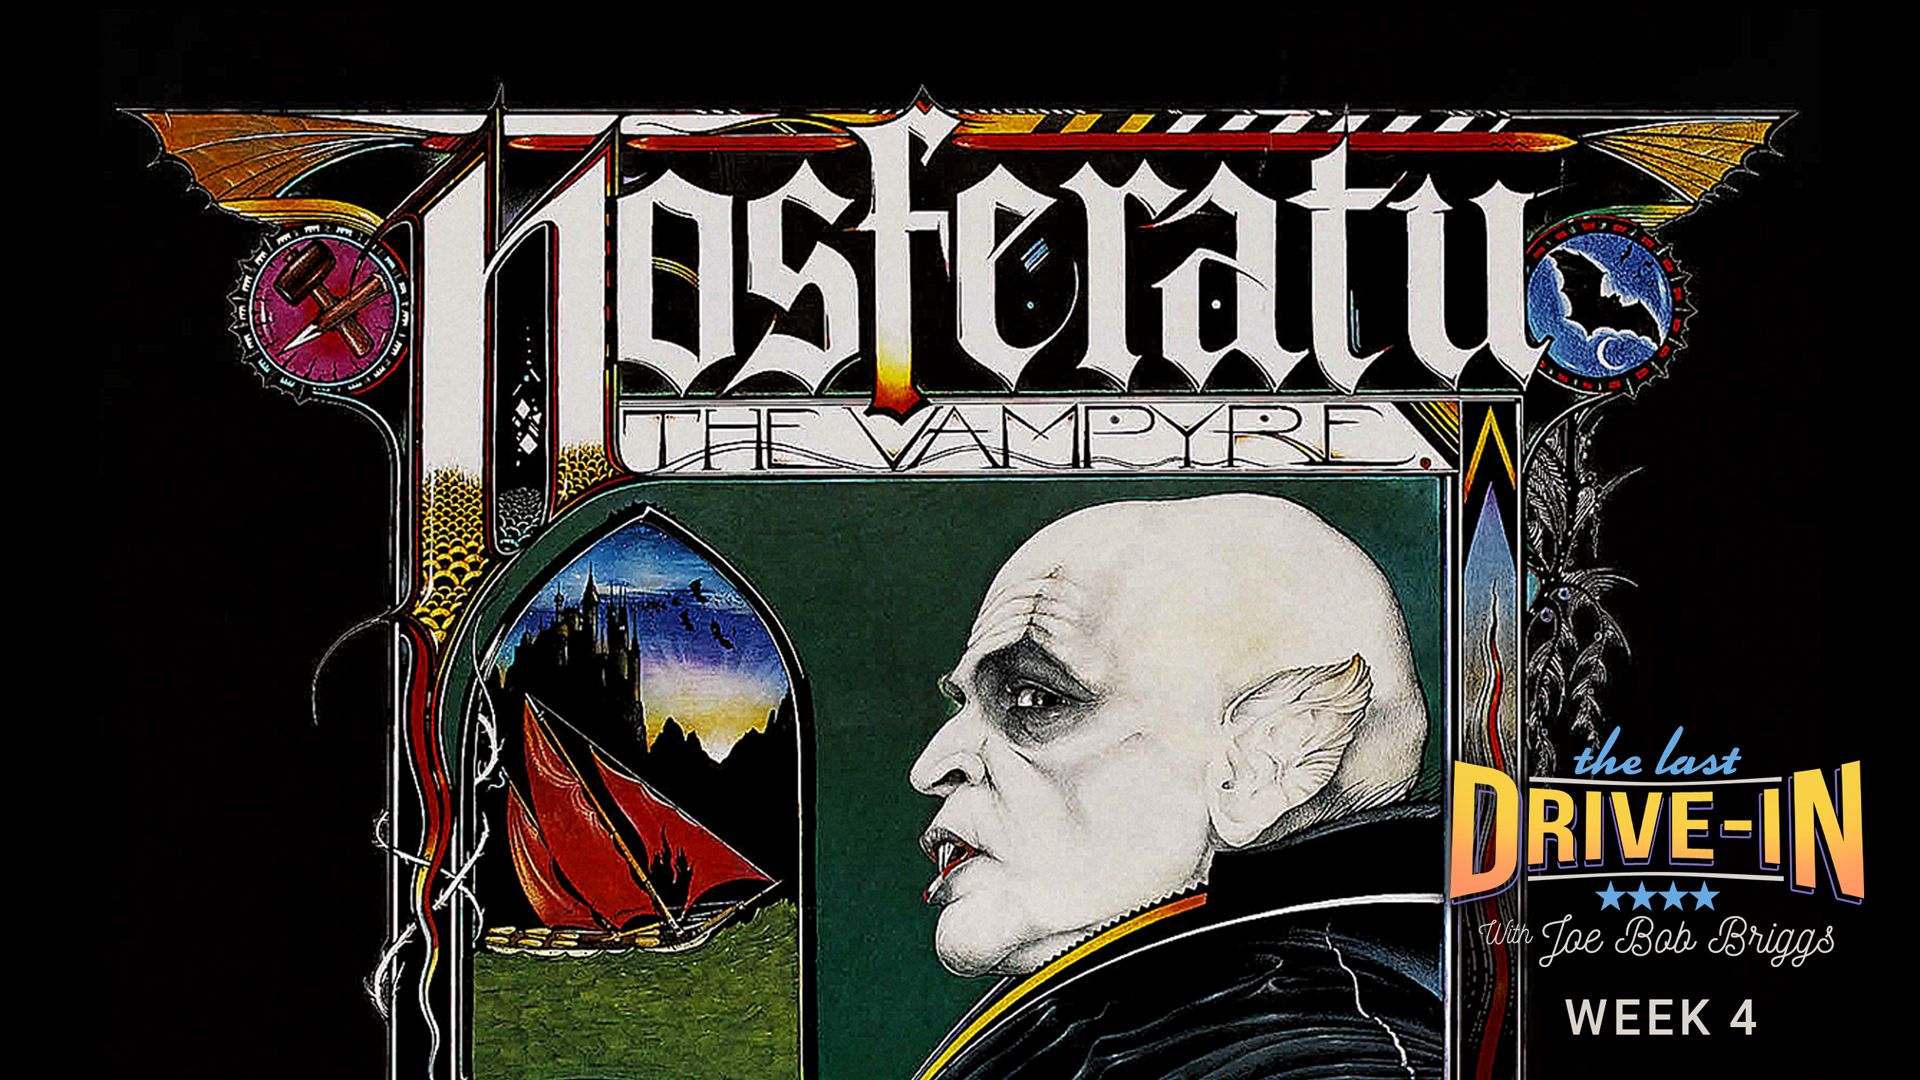 Nosferatu, the Vampyre, Klaus Kinski stars as the legendary vampire resurrected in modern-day Venice with an insatiable hunger for warm blood and rough sex., TV-MA, Season 1053667, Episode 8